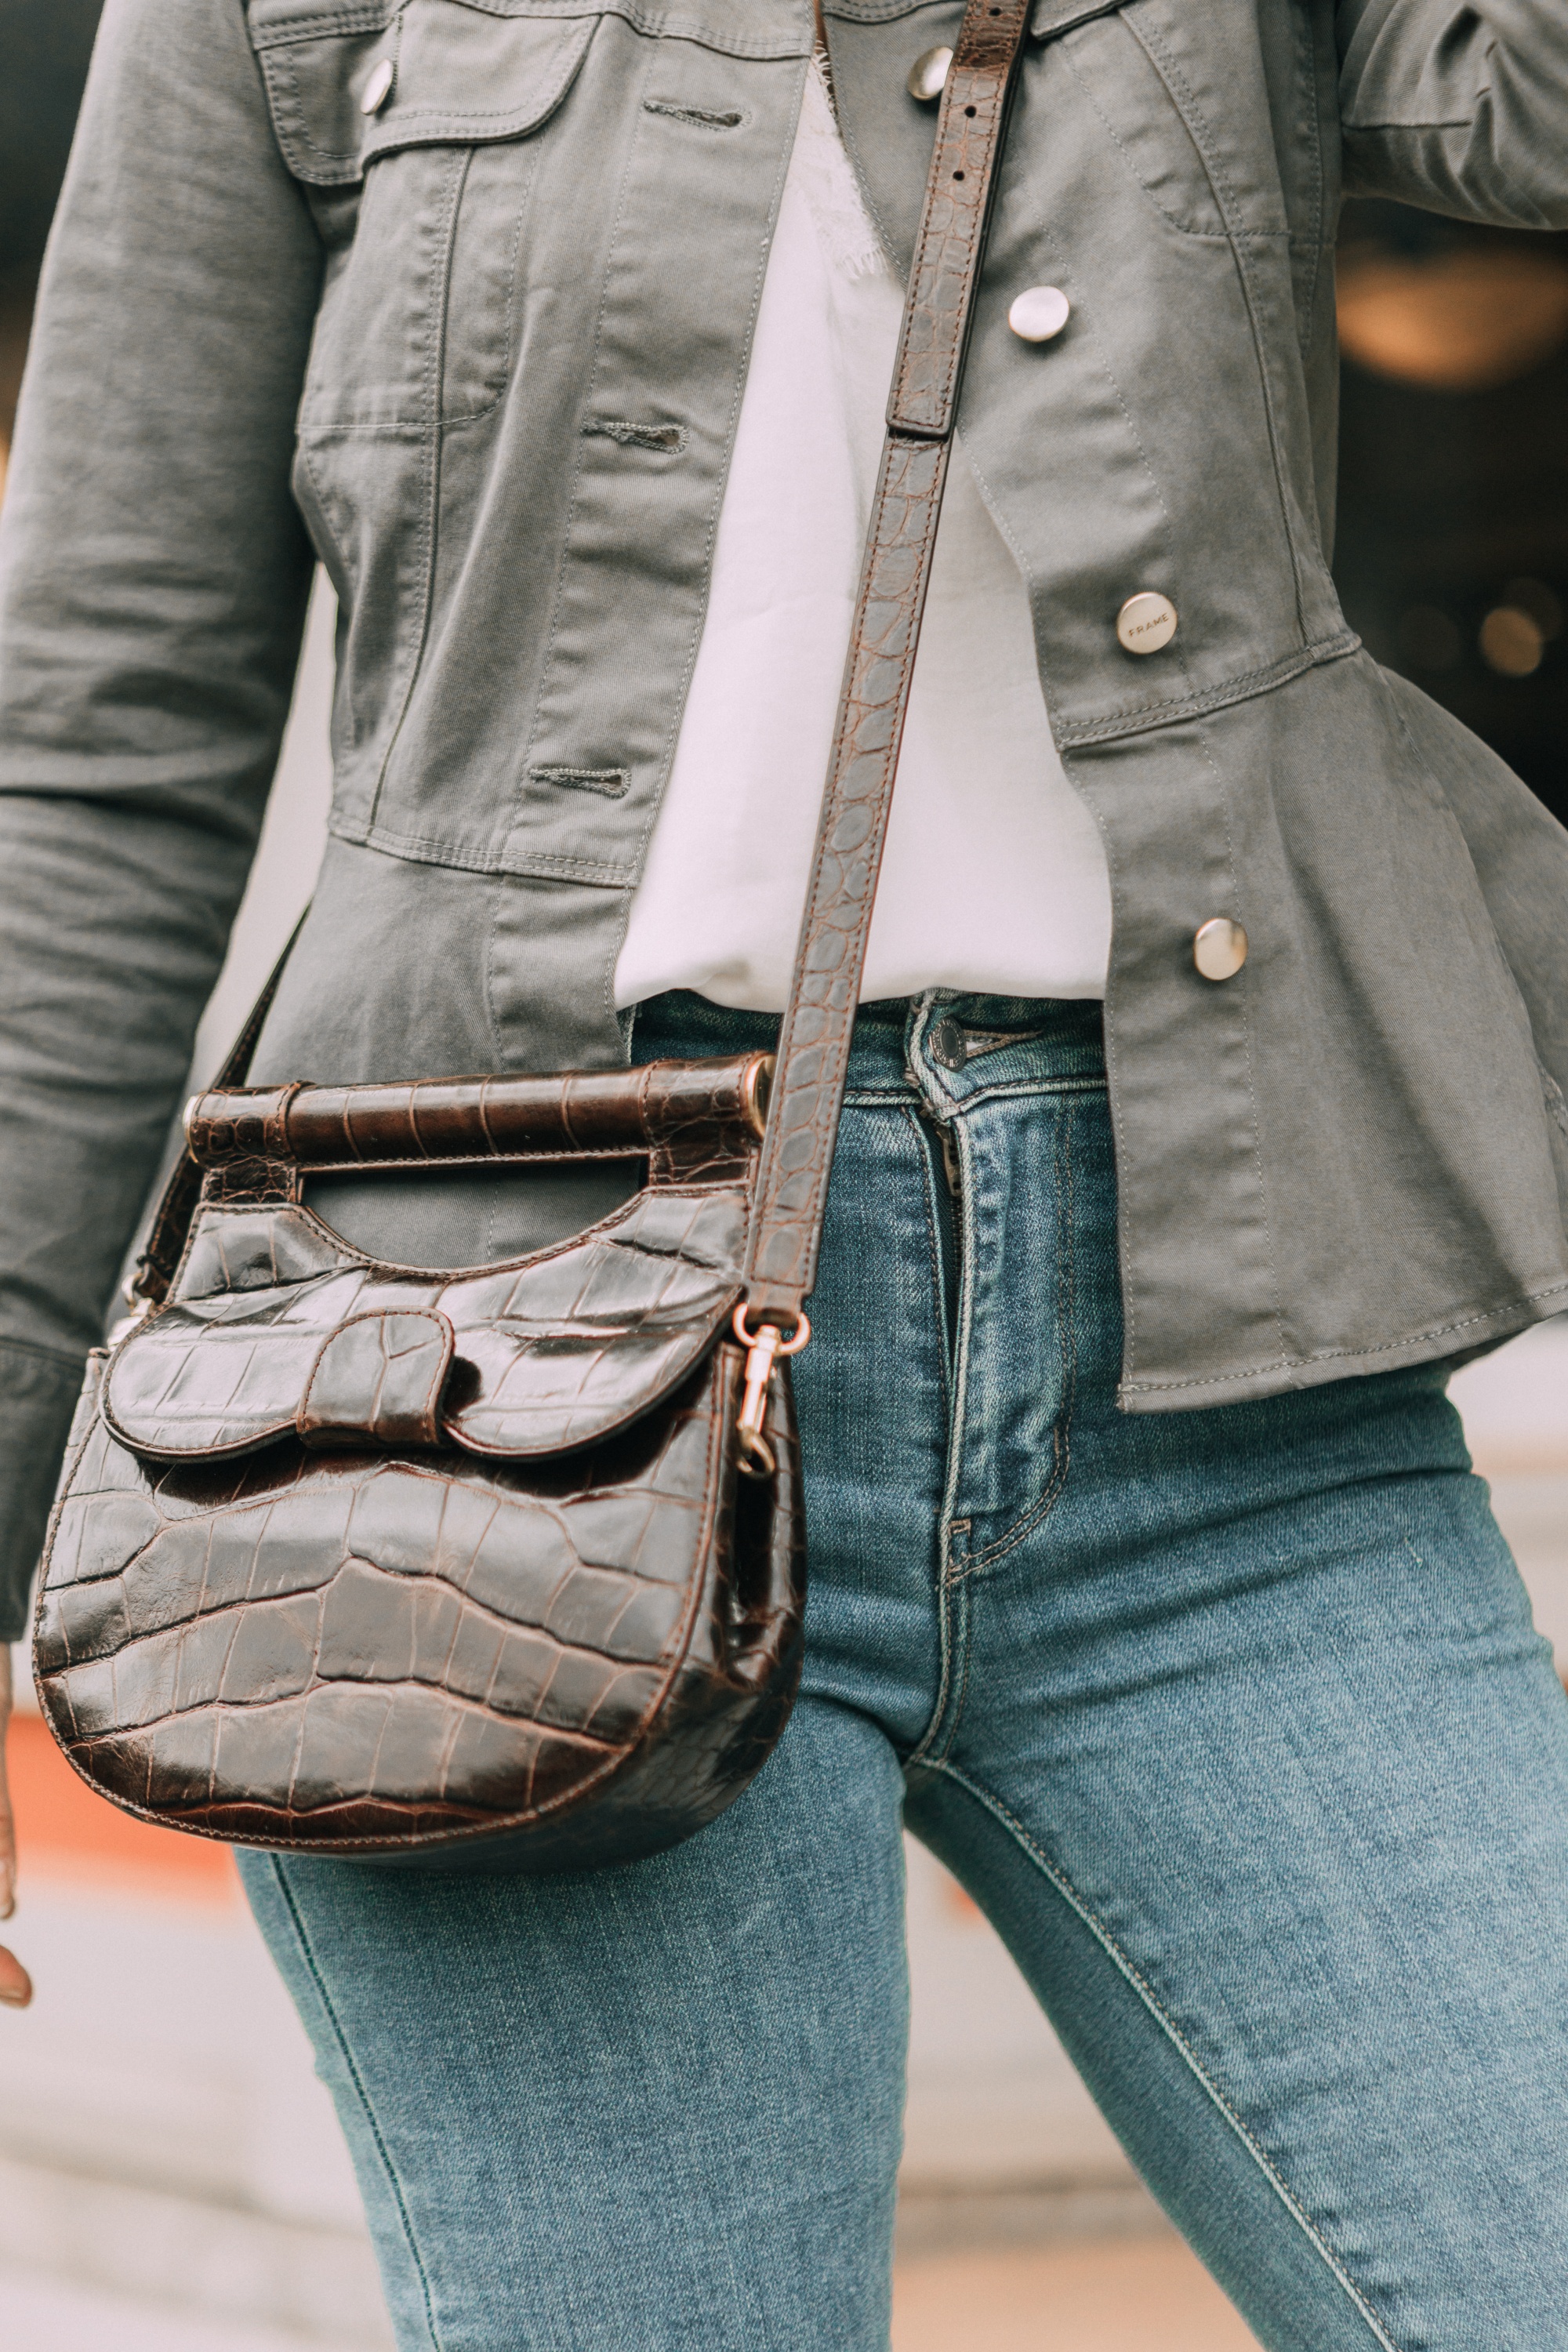 Hot Handbags, Fashion blogger Erin Busbee of BusbeeStyle.com wearing the brown STAUD Madeline Croc-Embossed Crossbody Bag with Levi jeans, white cami, and Frame peplum hem green jacket in Telluride, Colorado